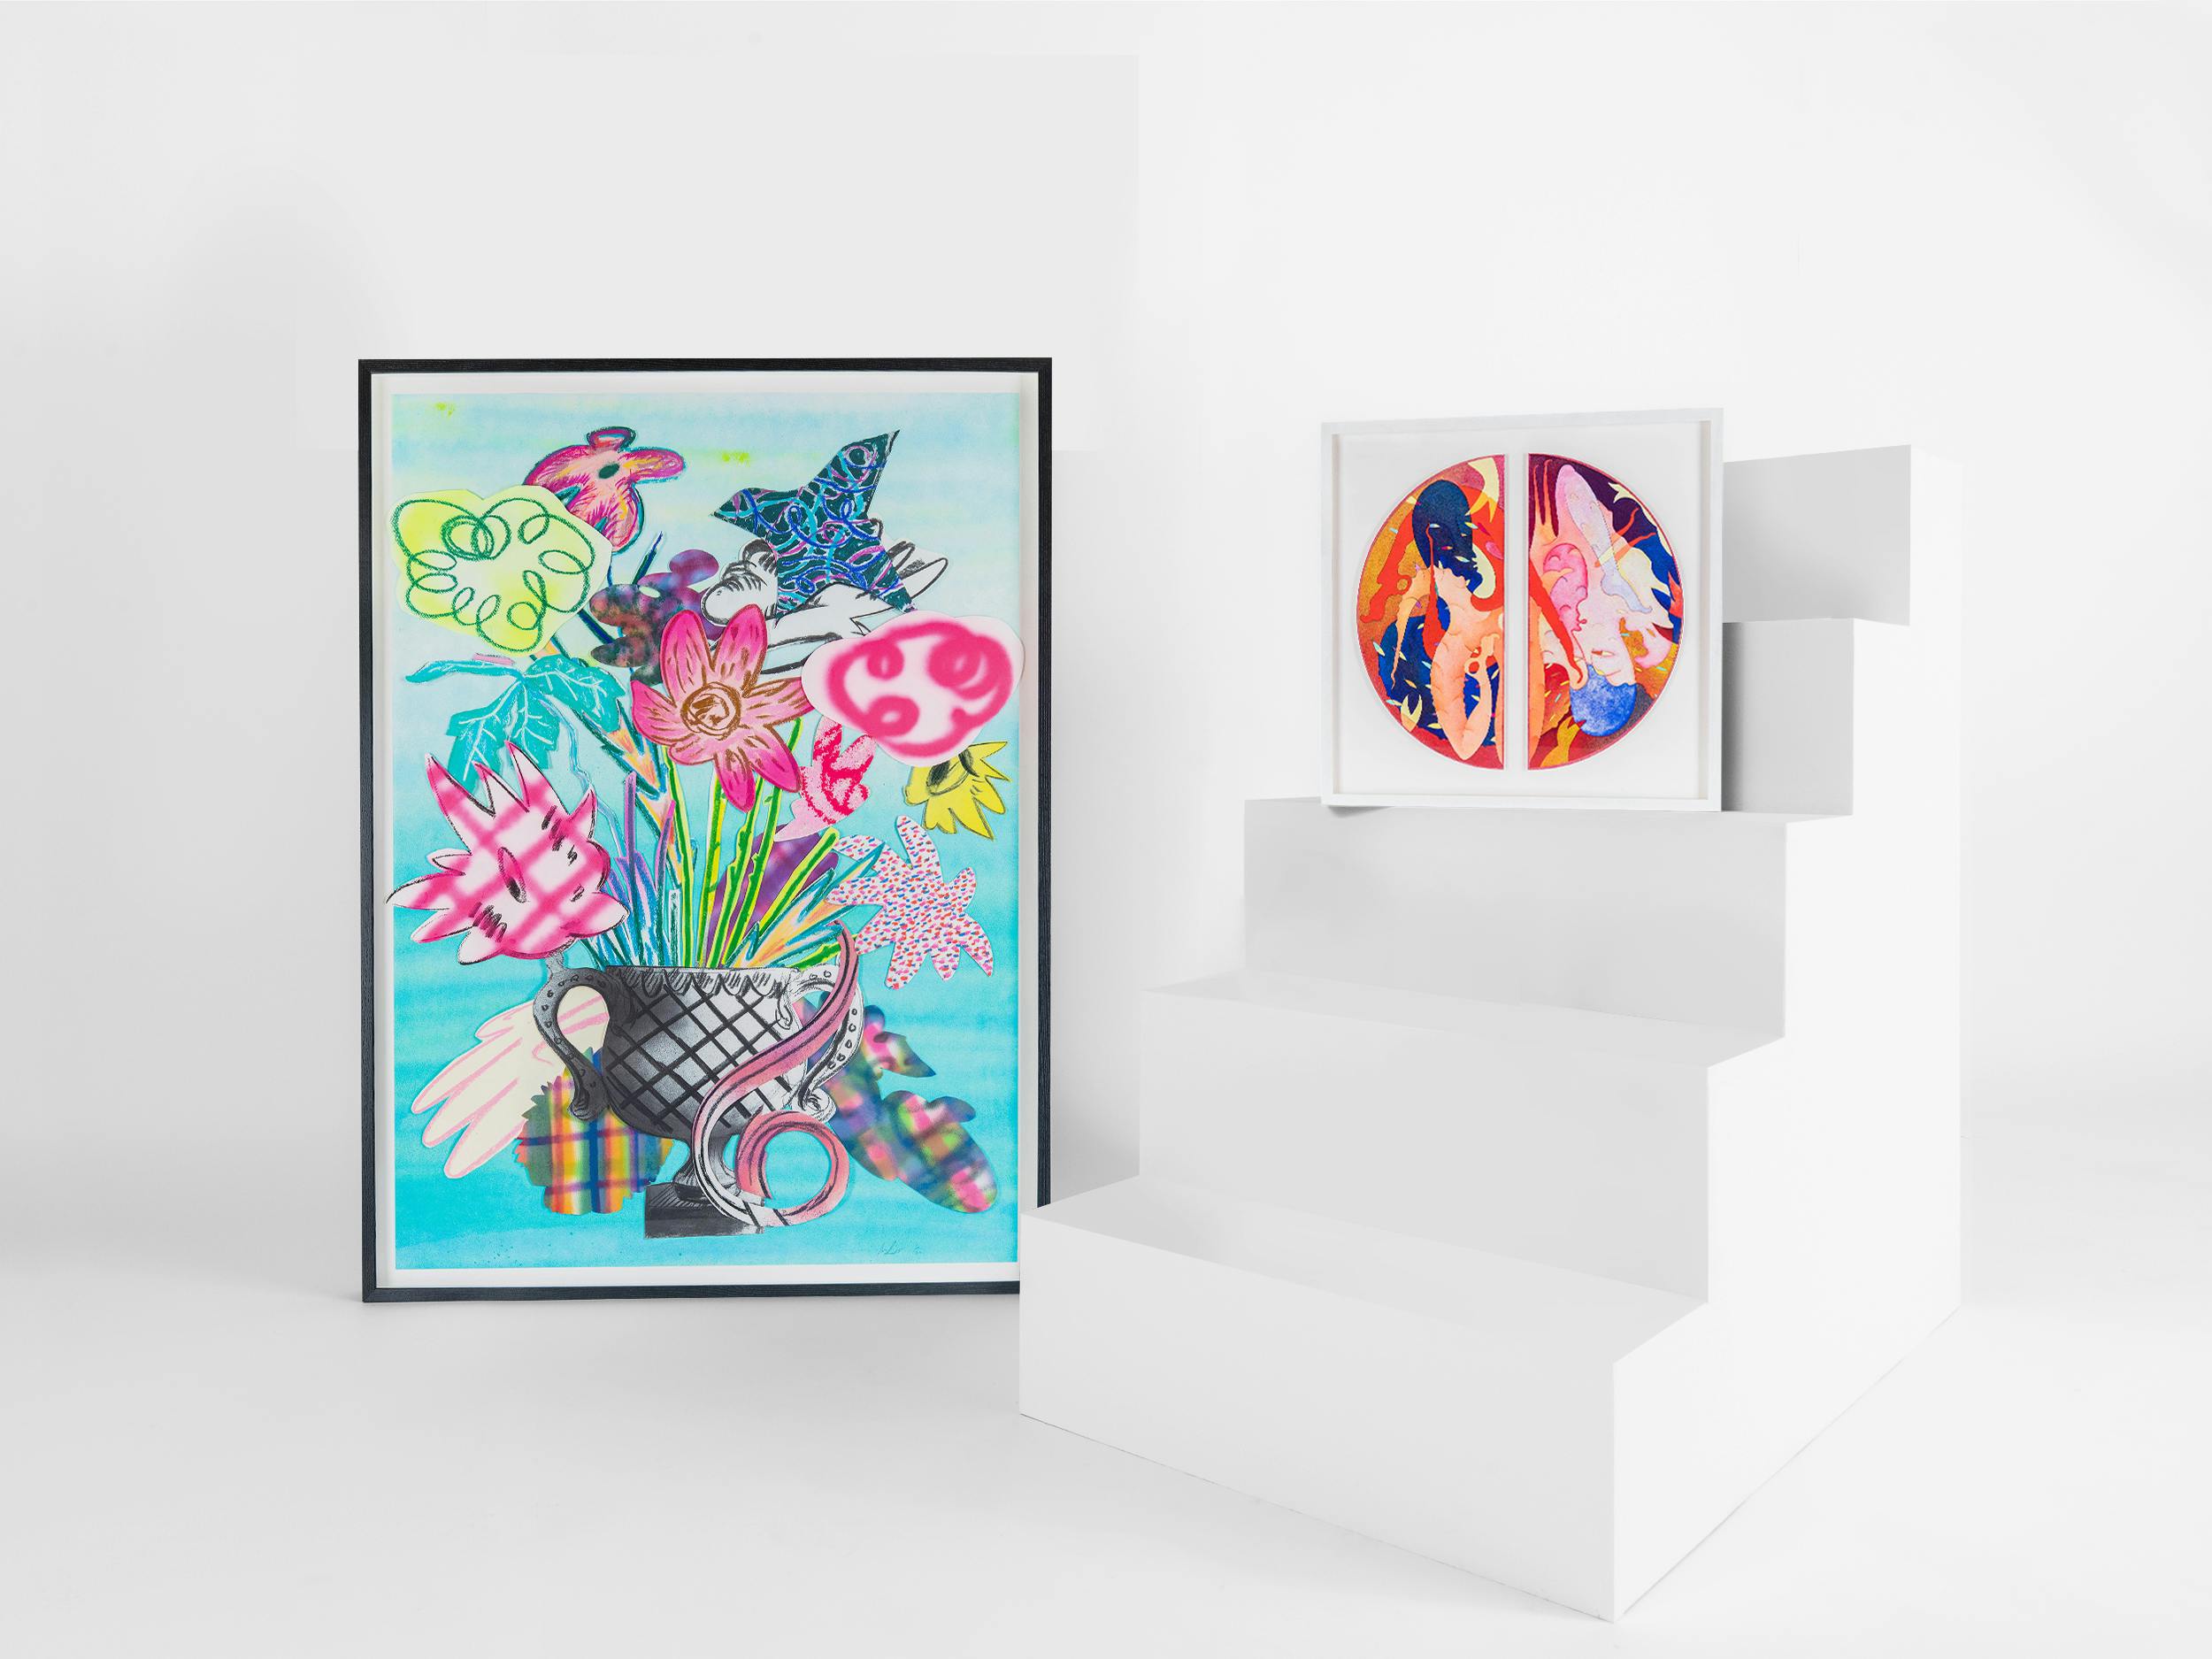 Limited edition artworks by David Price and Bea Bonofini, produced by King & McGaw 